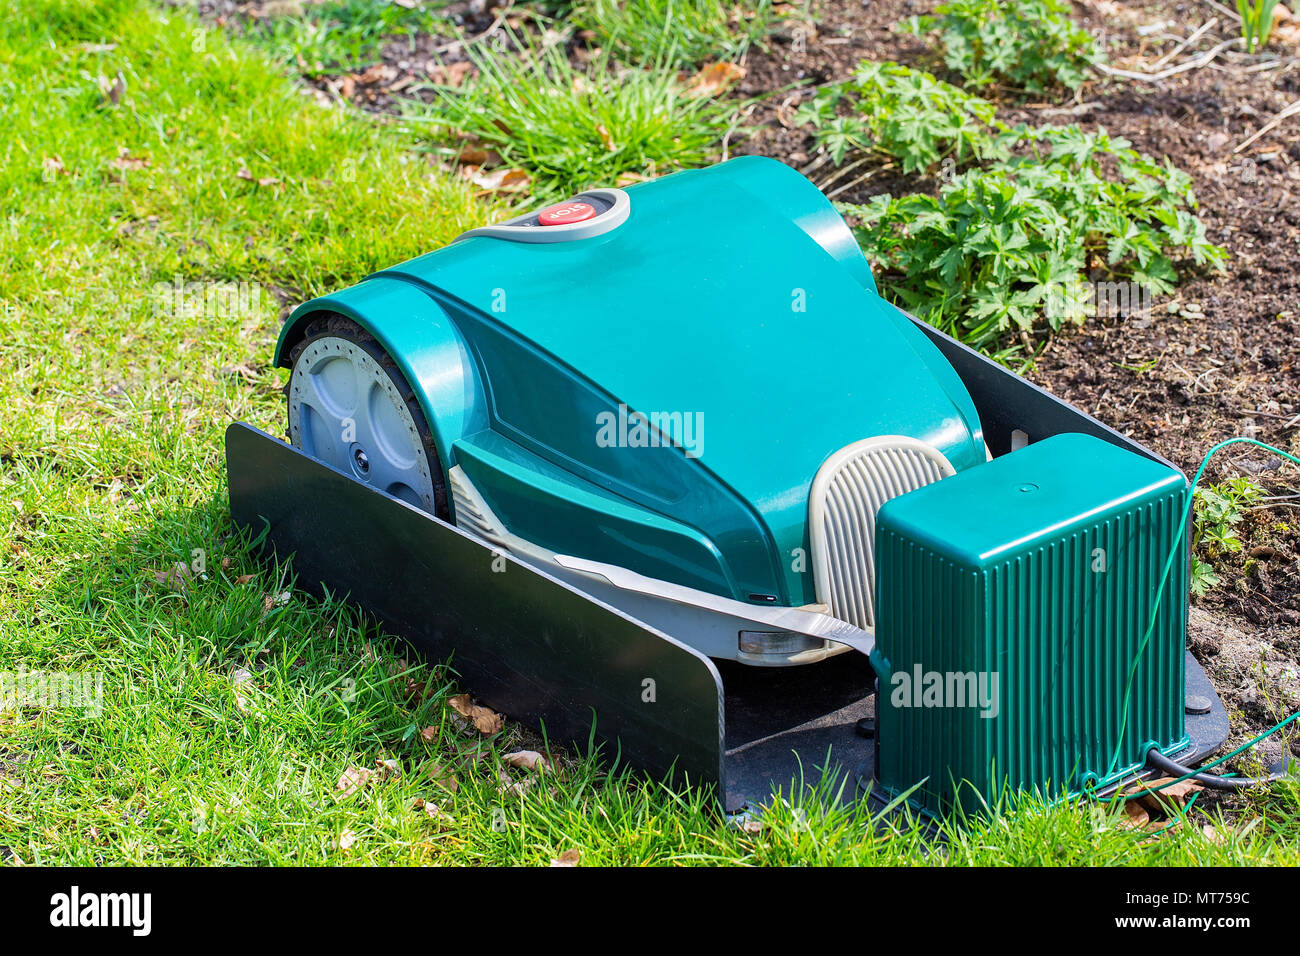 Green electric robotic Lawnmower charging on grass Stock Photo